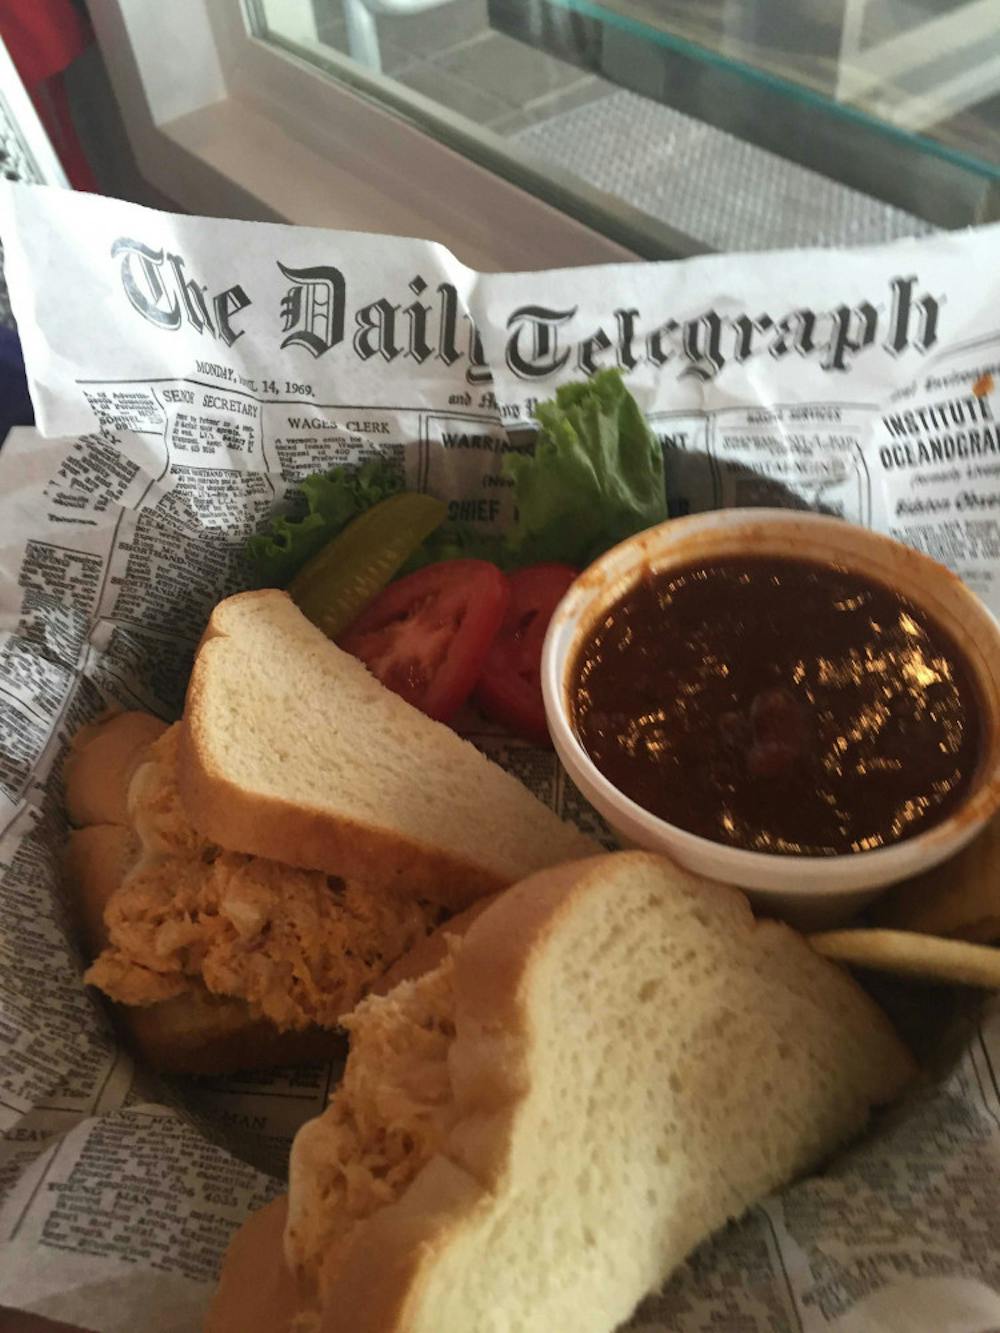 Molly's Red Rooster Cafe serves its sandwiches The sandwiches in cutout sheets meant to resemble a page of the Telegraph, the daily British newspaper. 